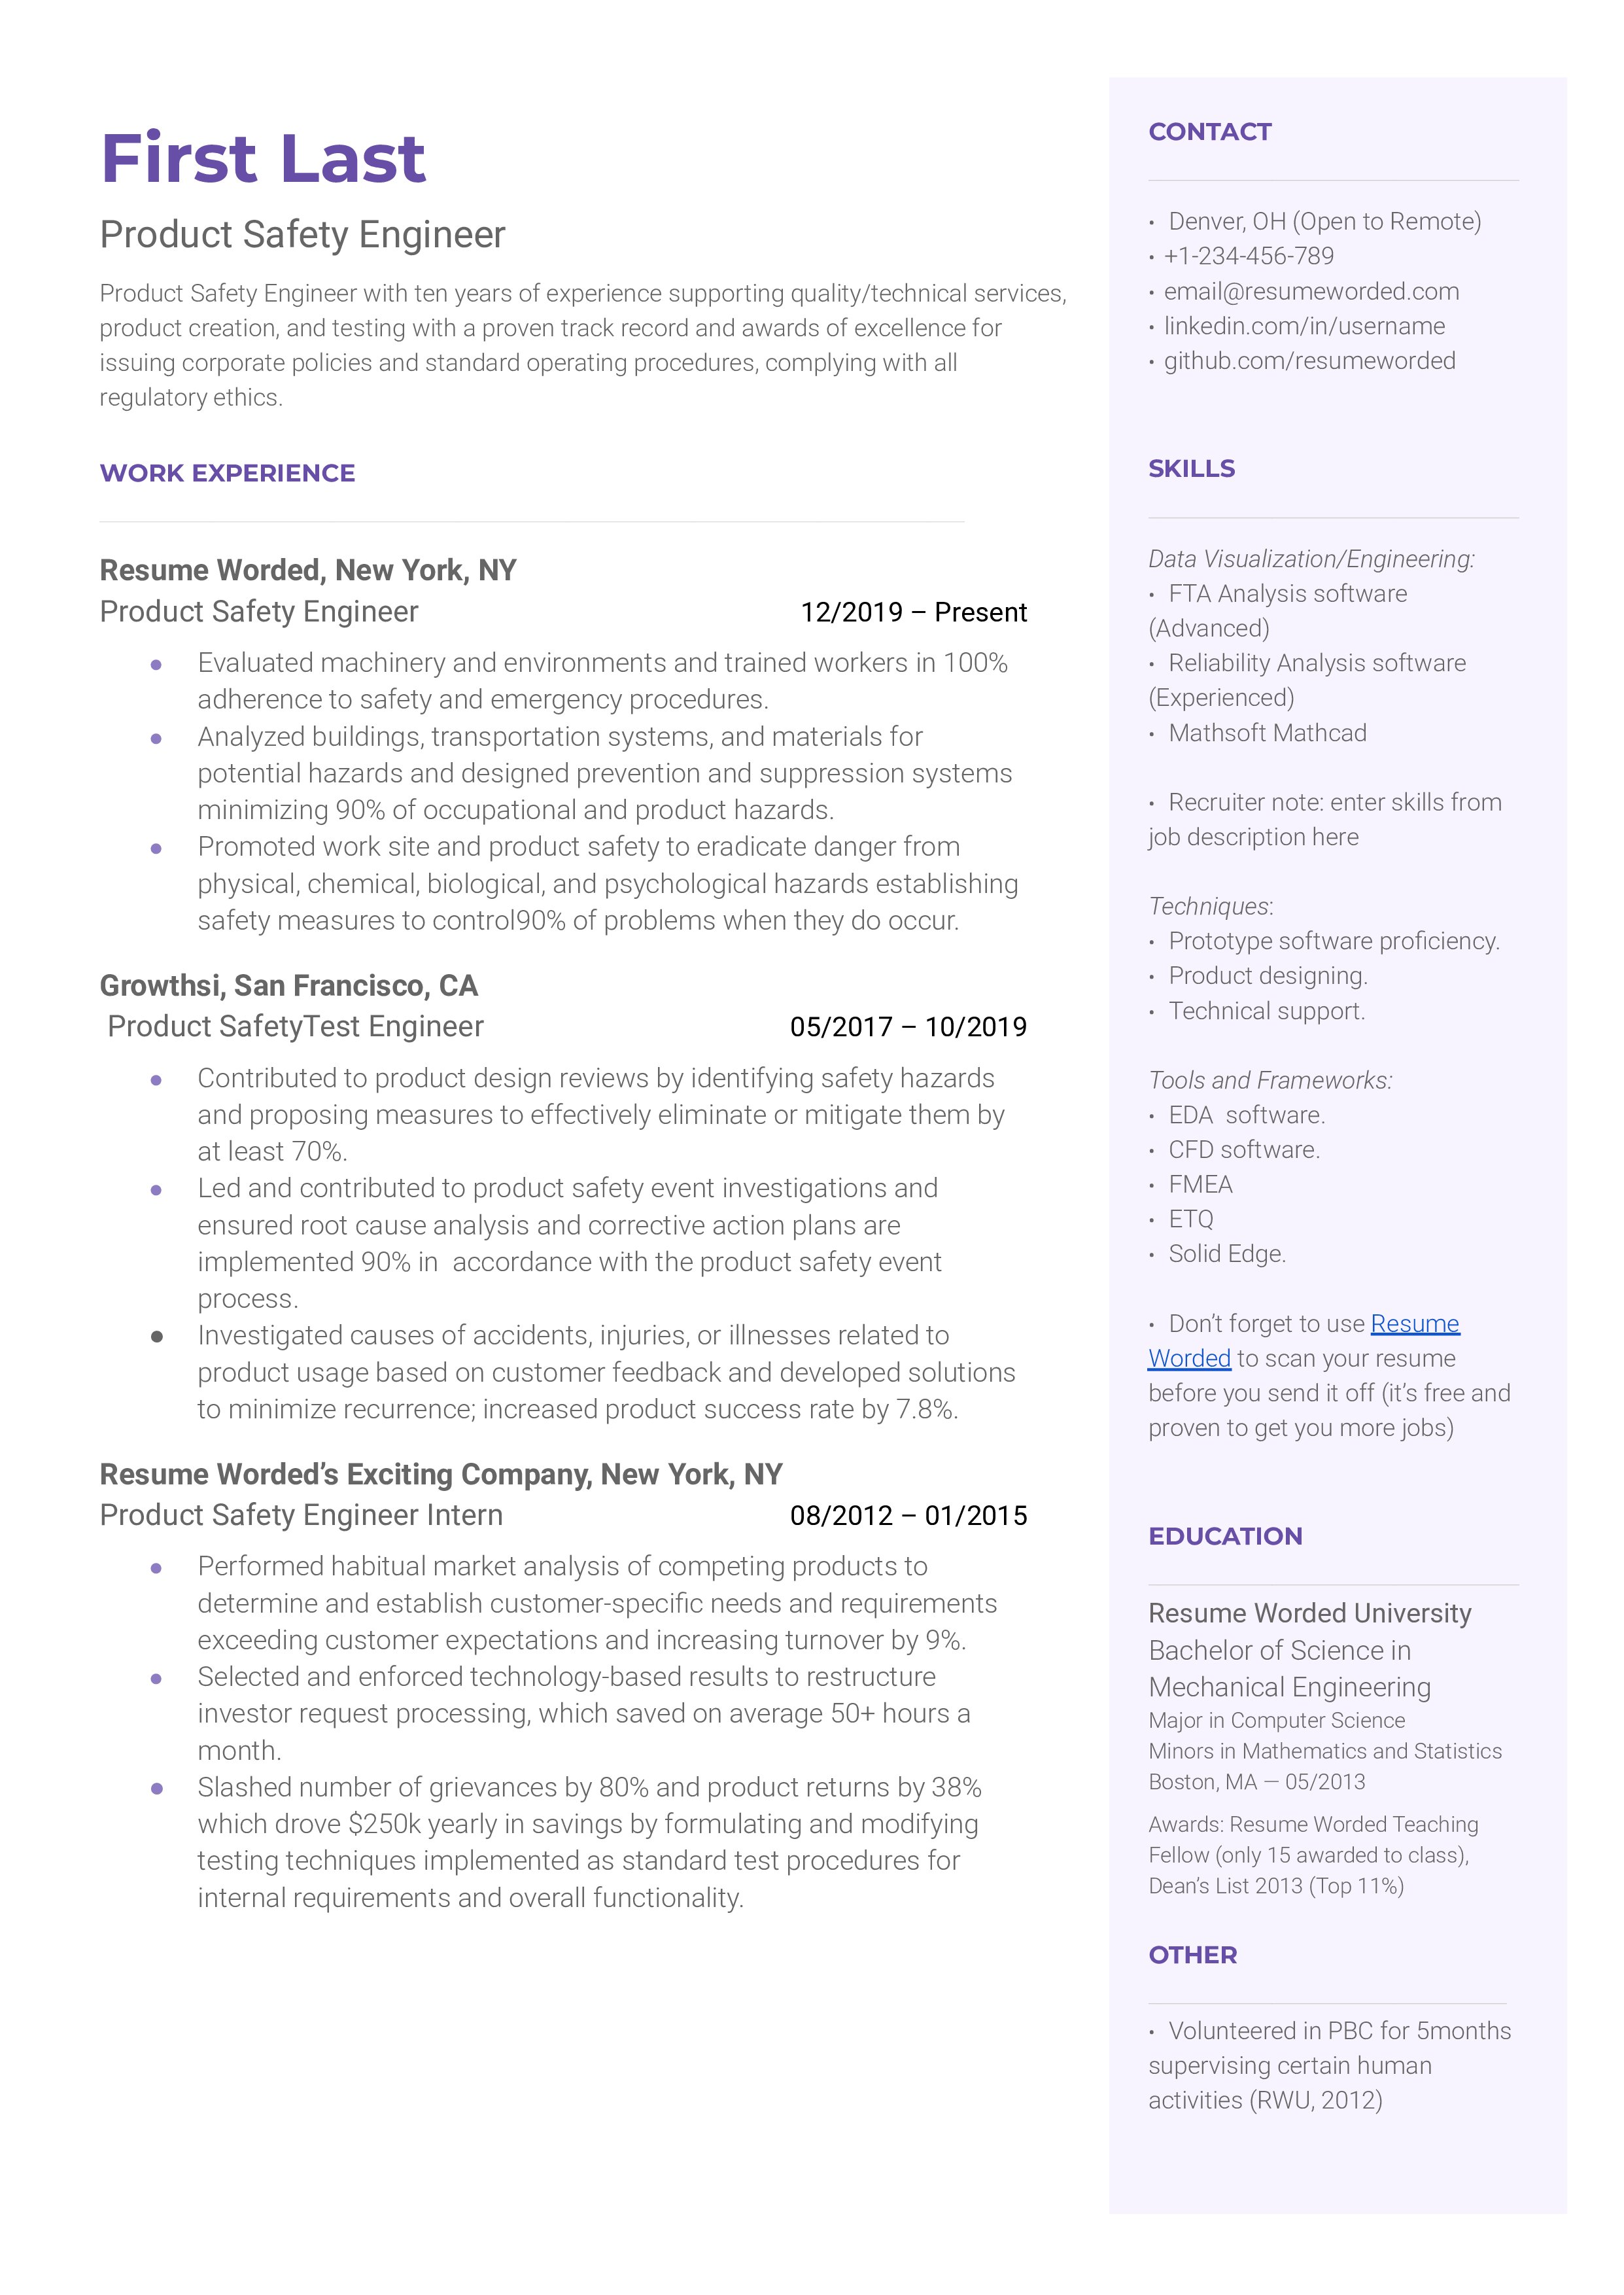 A well-organized CV of a Product Safety Engineer showcasing key skills, certifications, and experience.